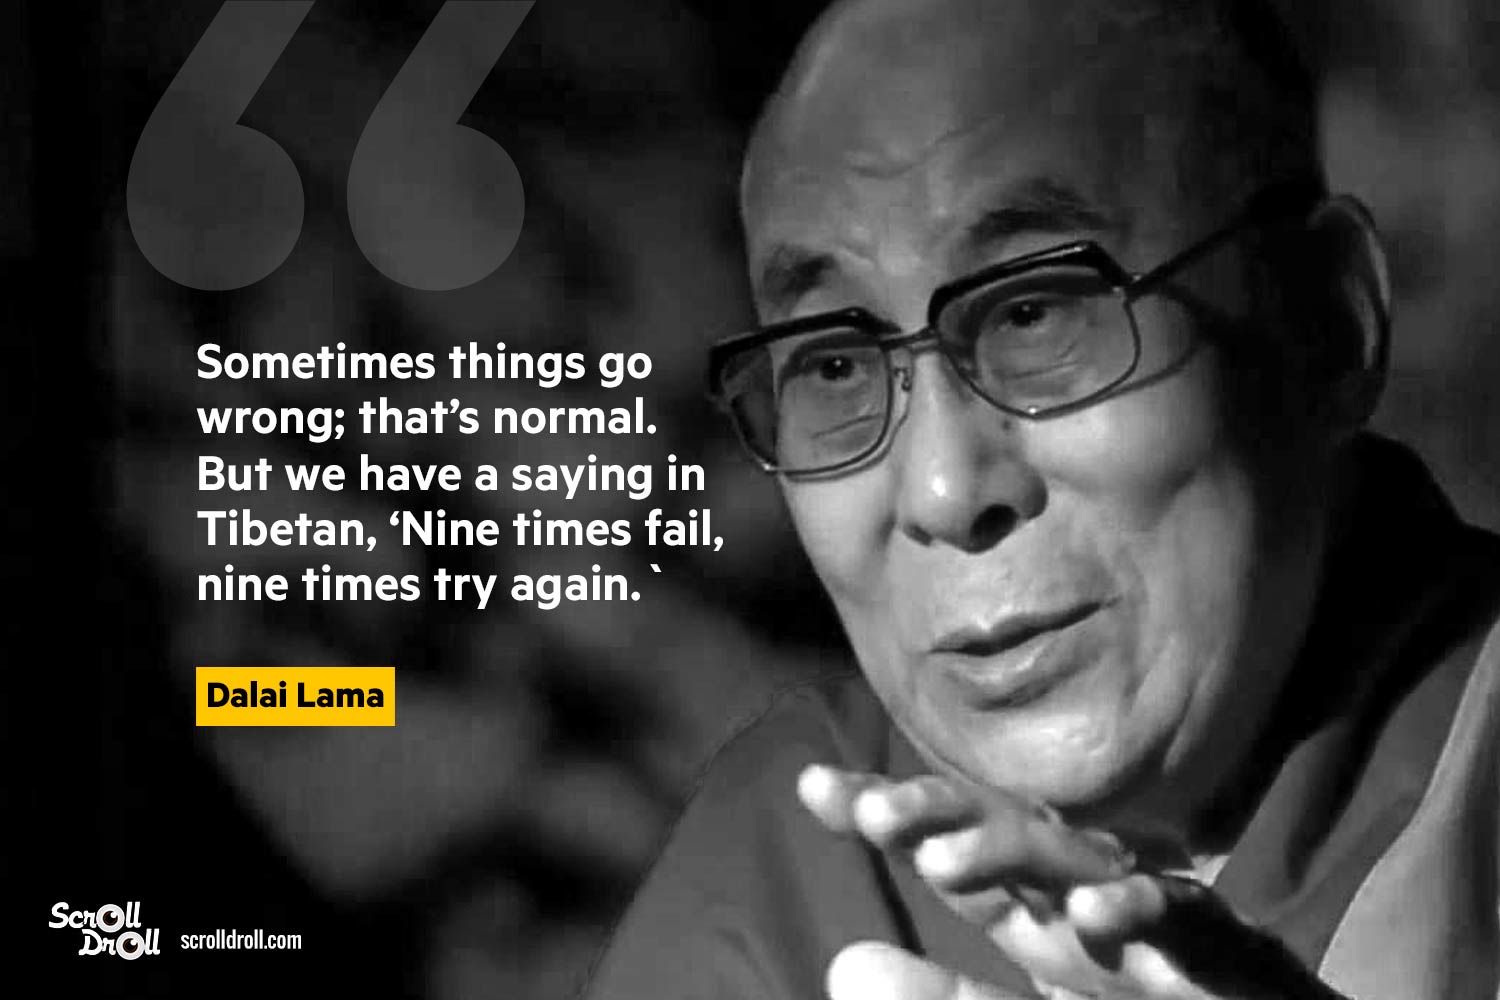 Dalai Lama Quotes (10) - The Best of Indian Pop Culture & What’s ...